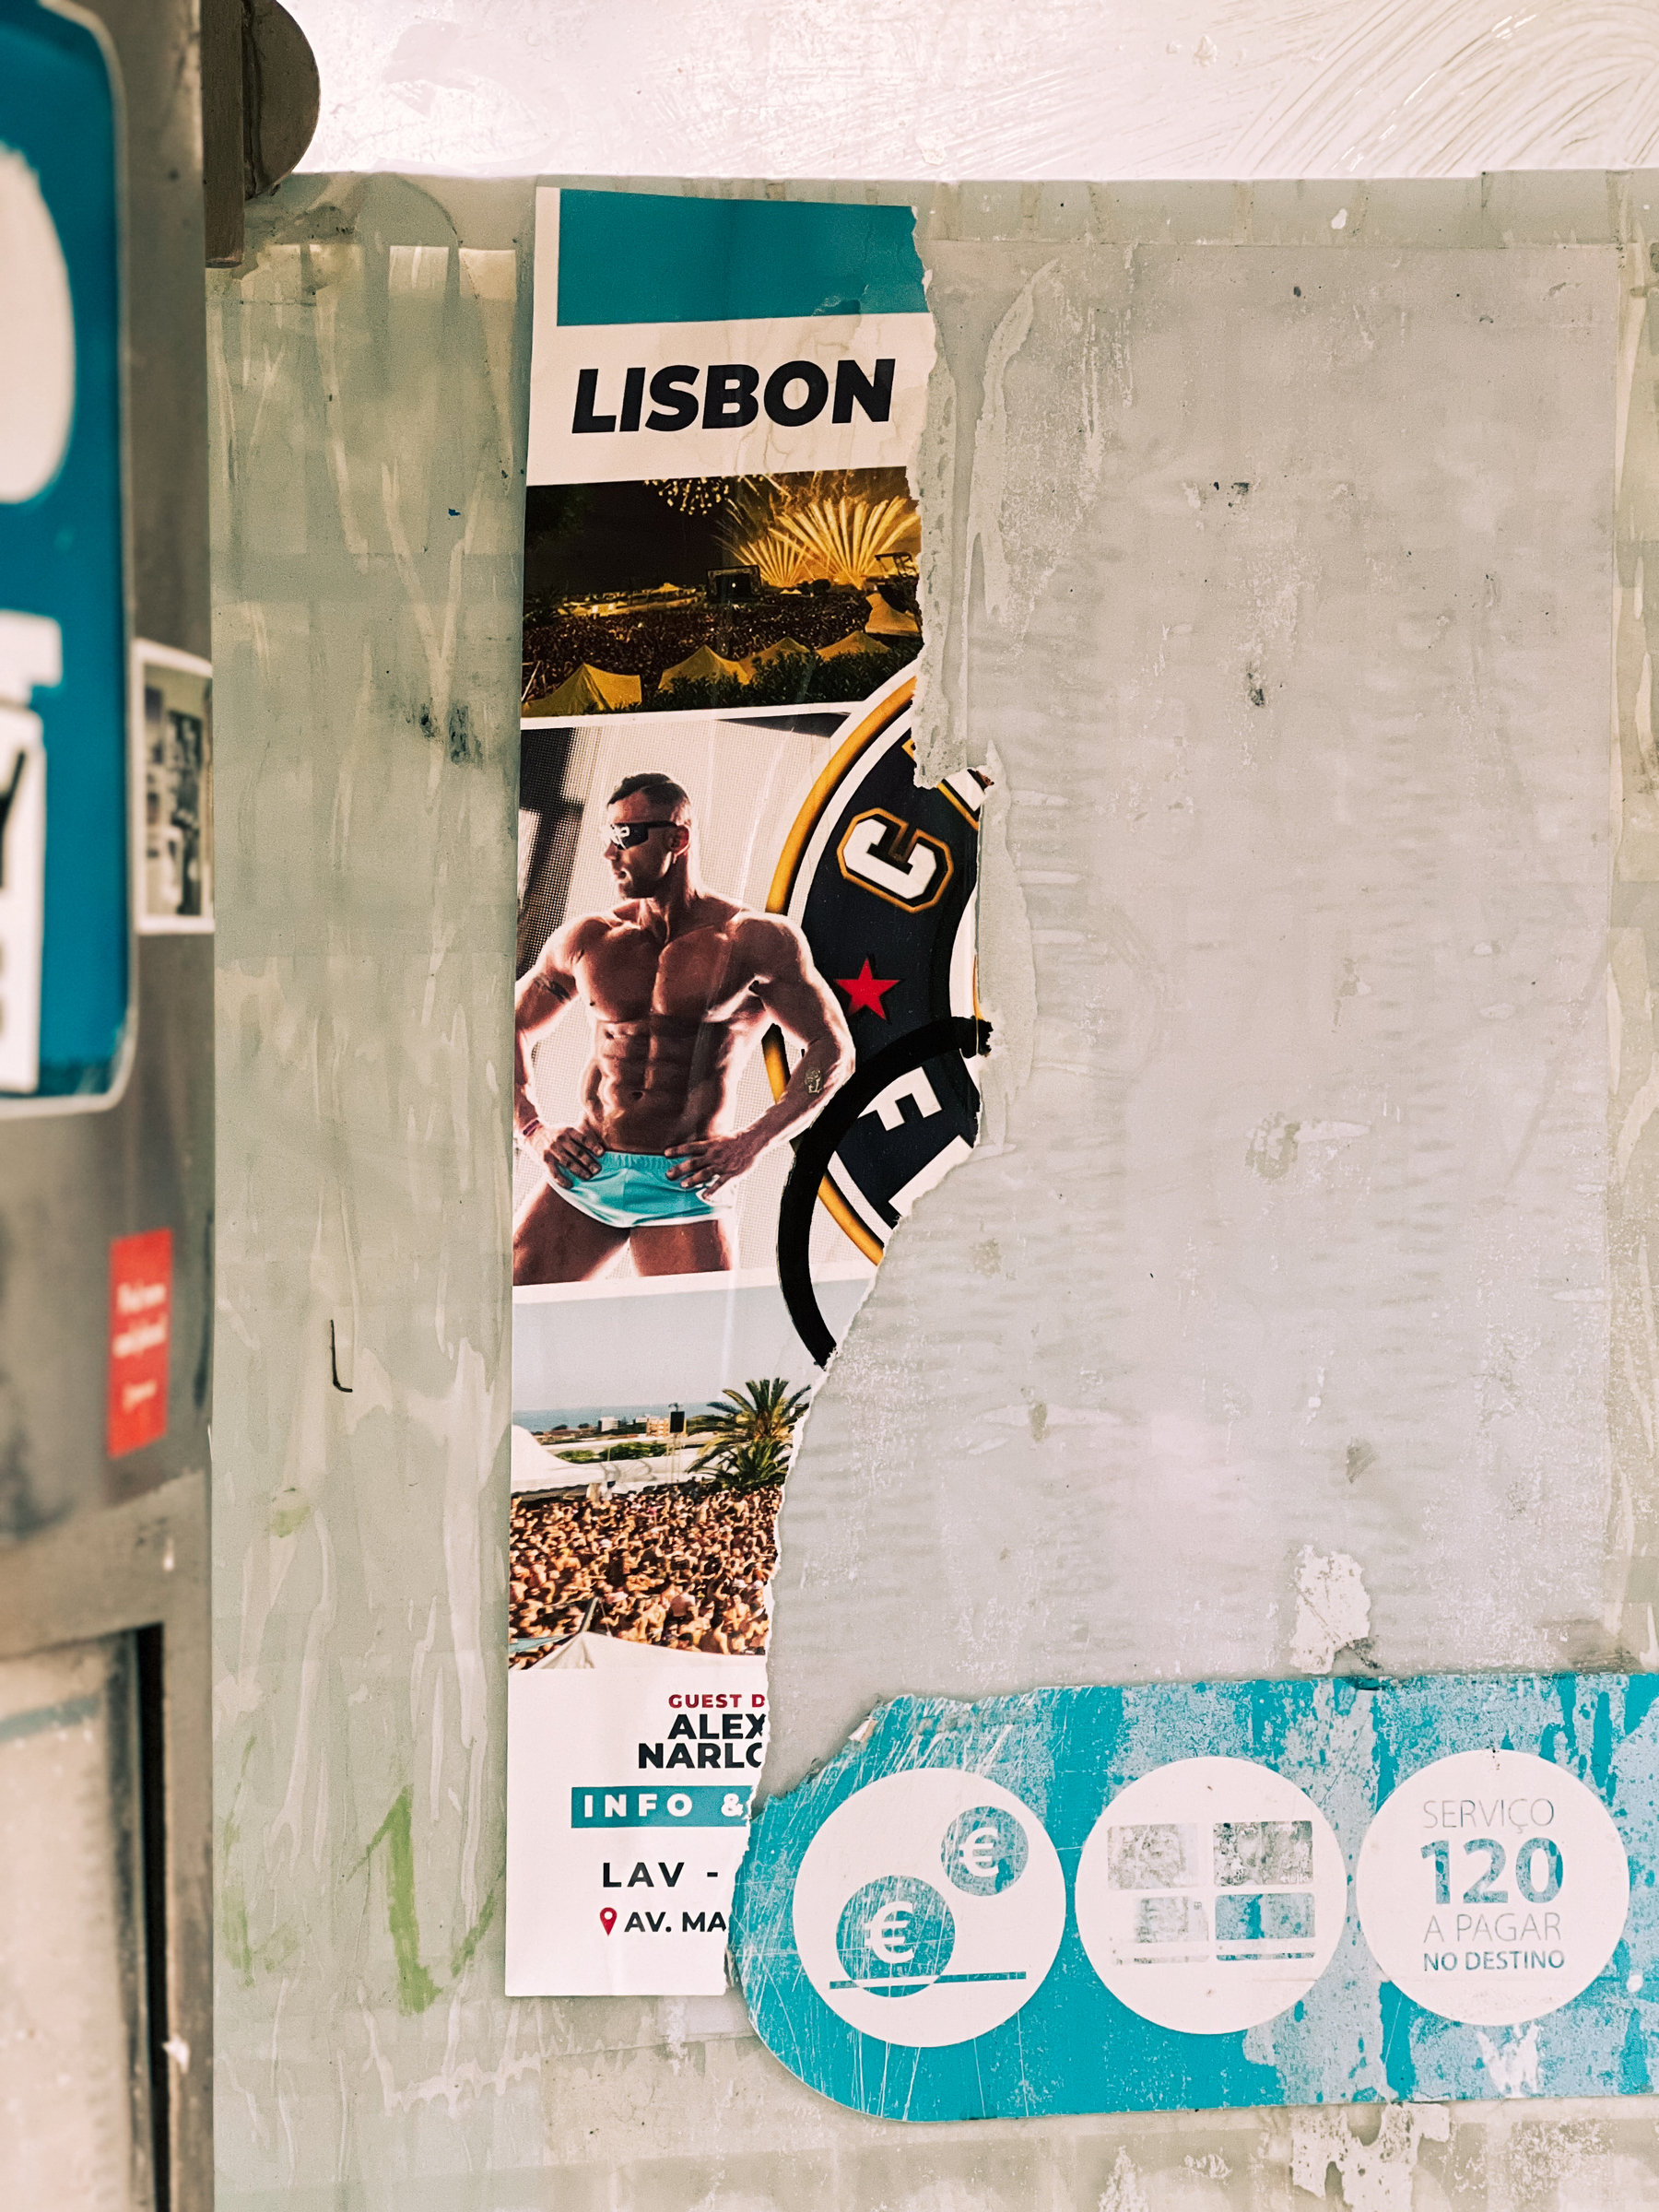 A muscular gentleman, and the word “Lisbon” above him. It’s a poster, most of it is missing. 